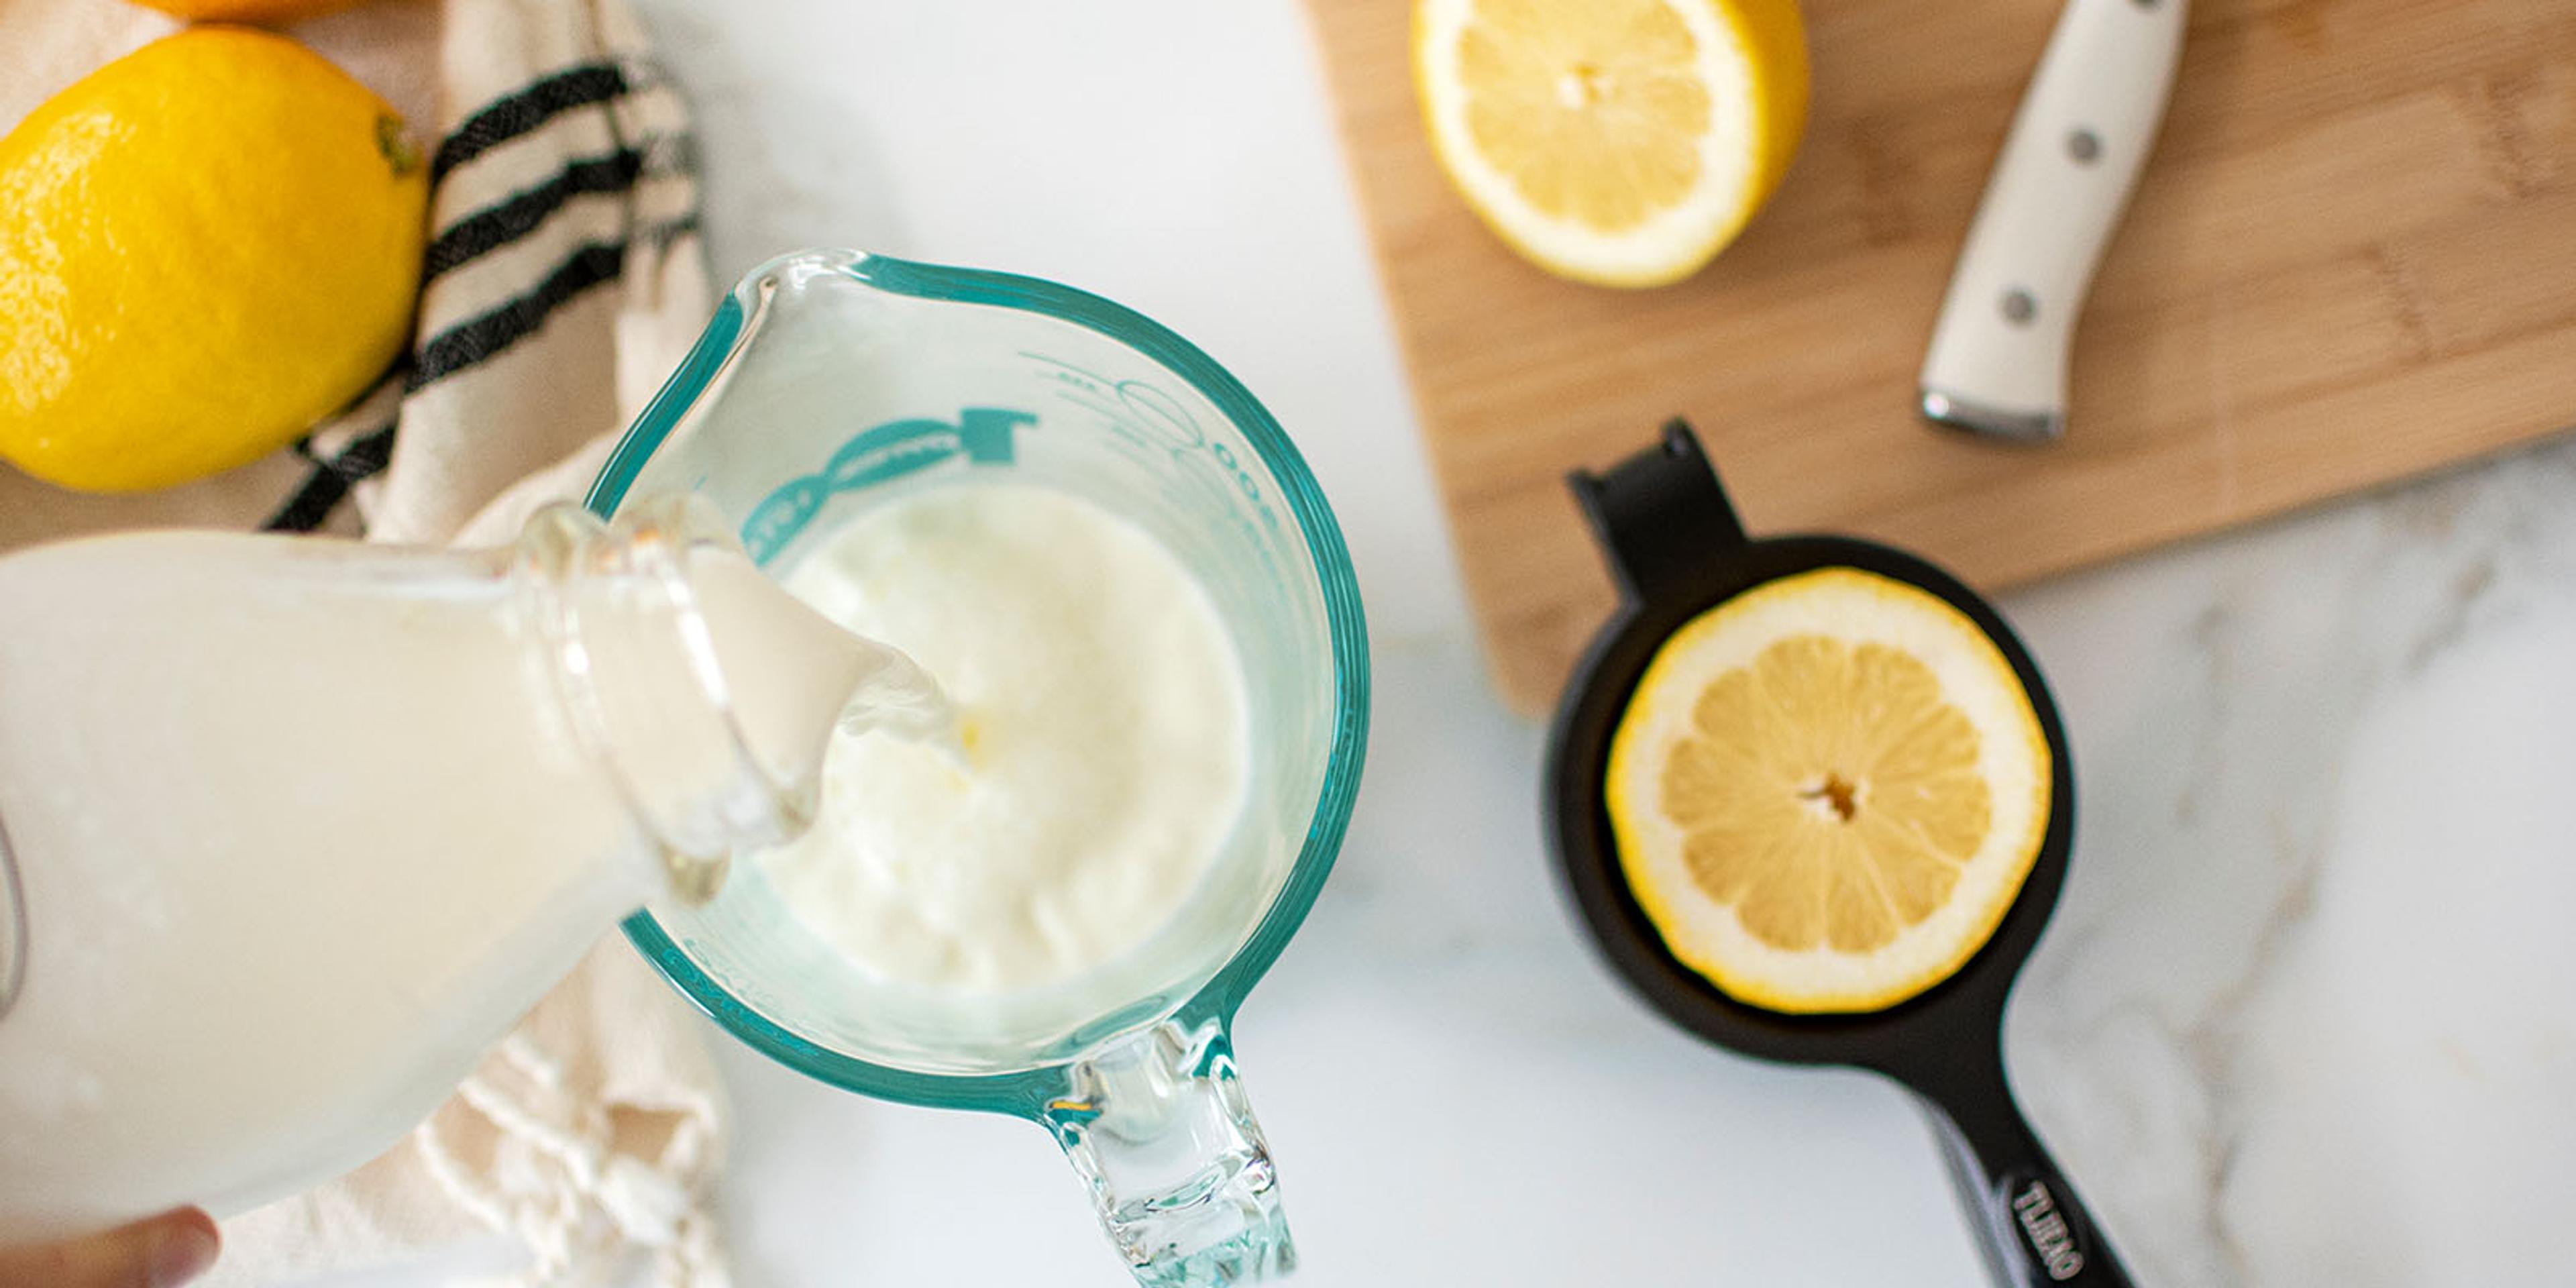 Milk and lemon are measured to make buttermilk.